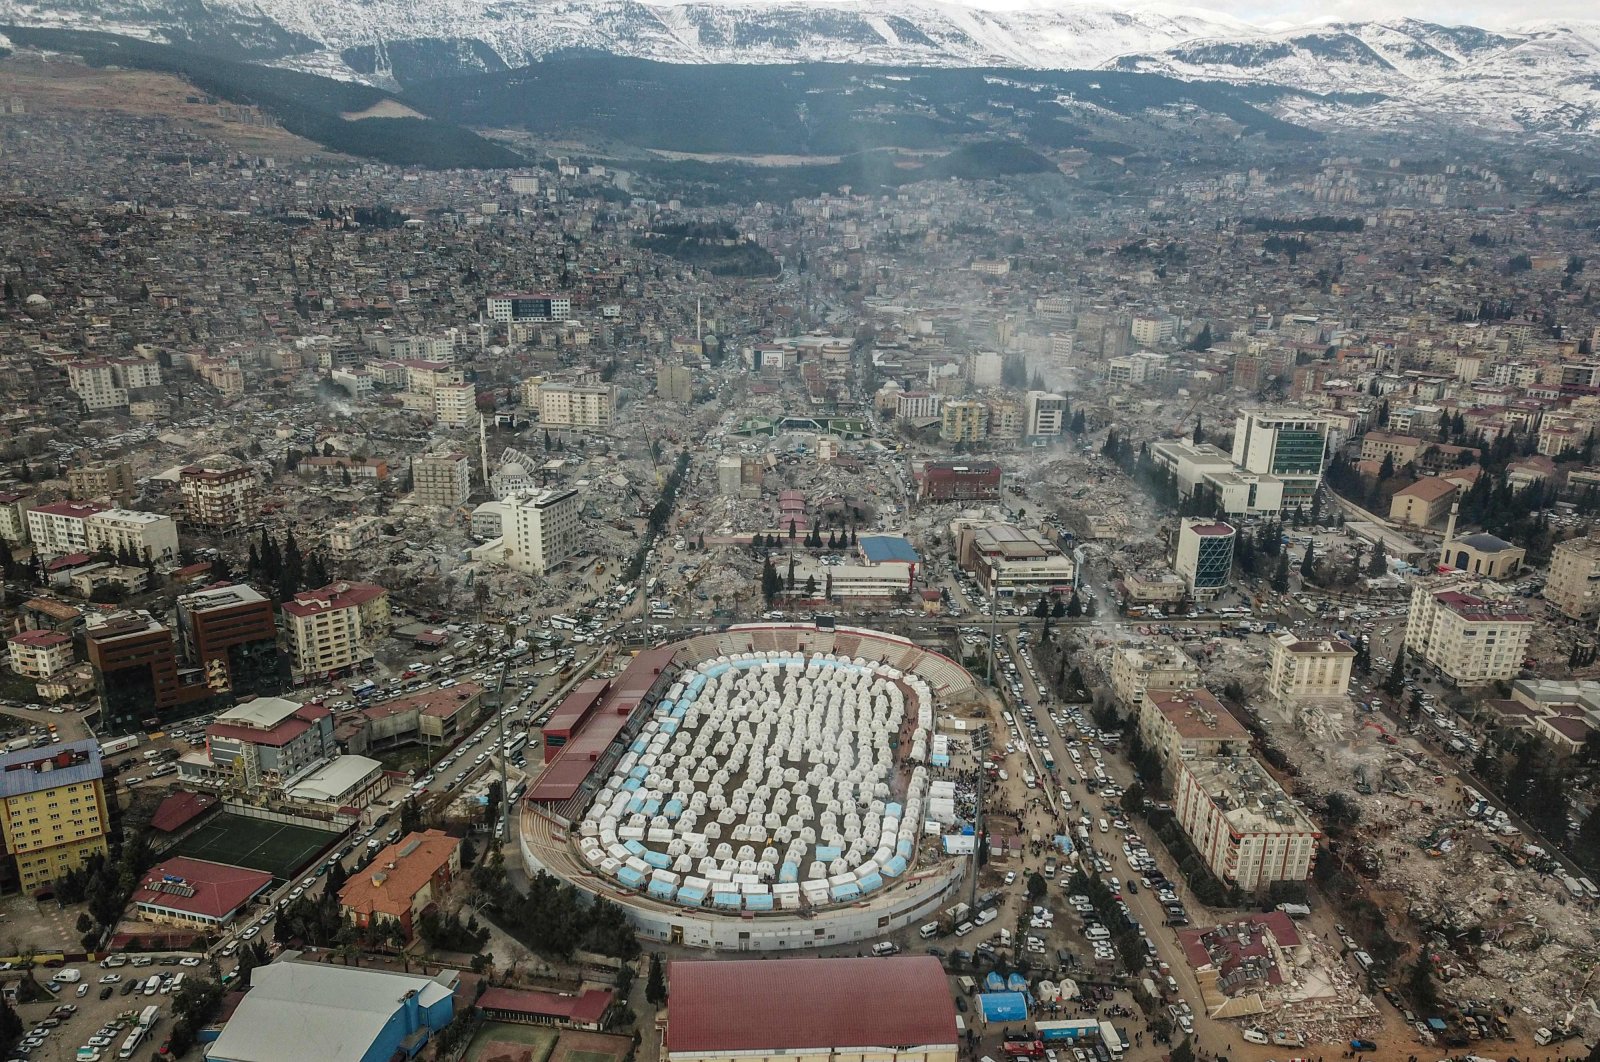 This aerial view shows tents set up on the grounds of a stadium after an earthquake, in Kahramanmaraş, southeastern Türkiye, Feb. 10, 2023. (AFP Photo)